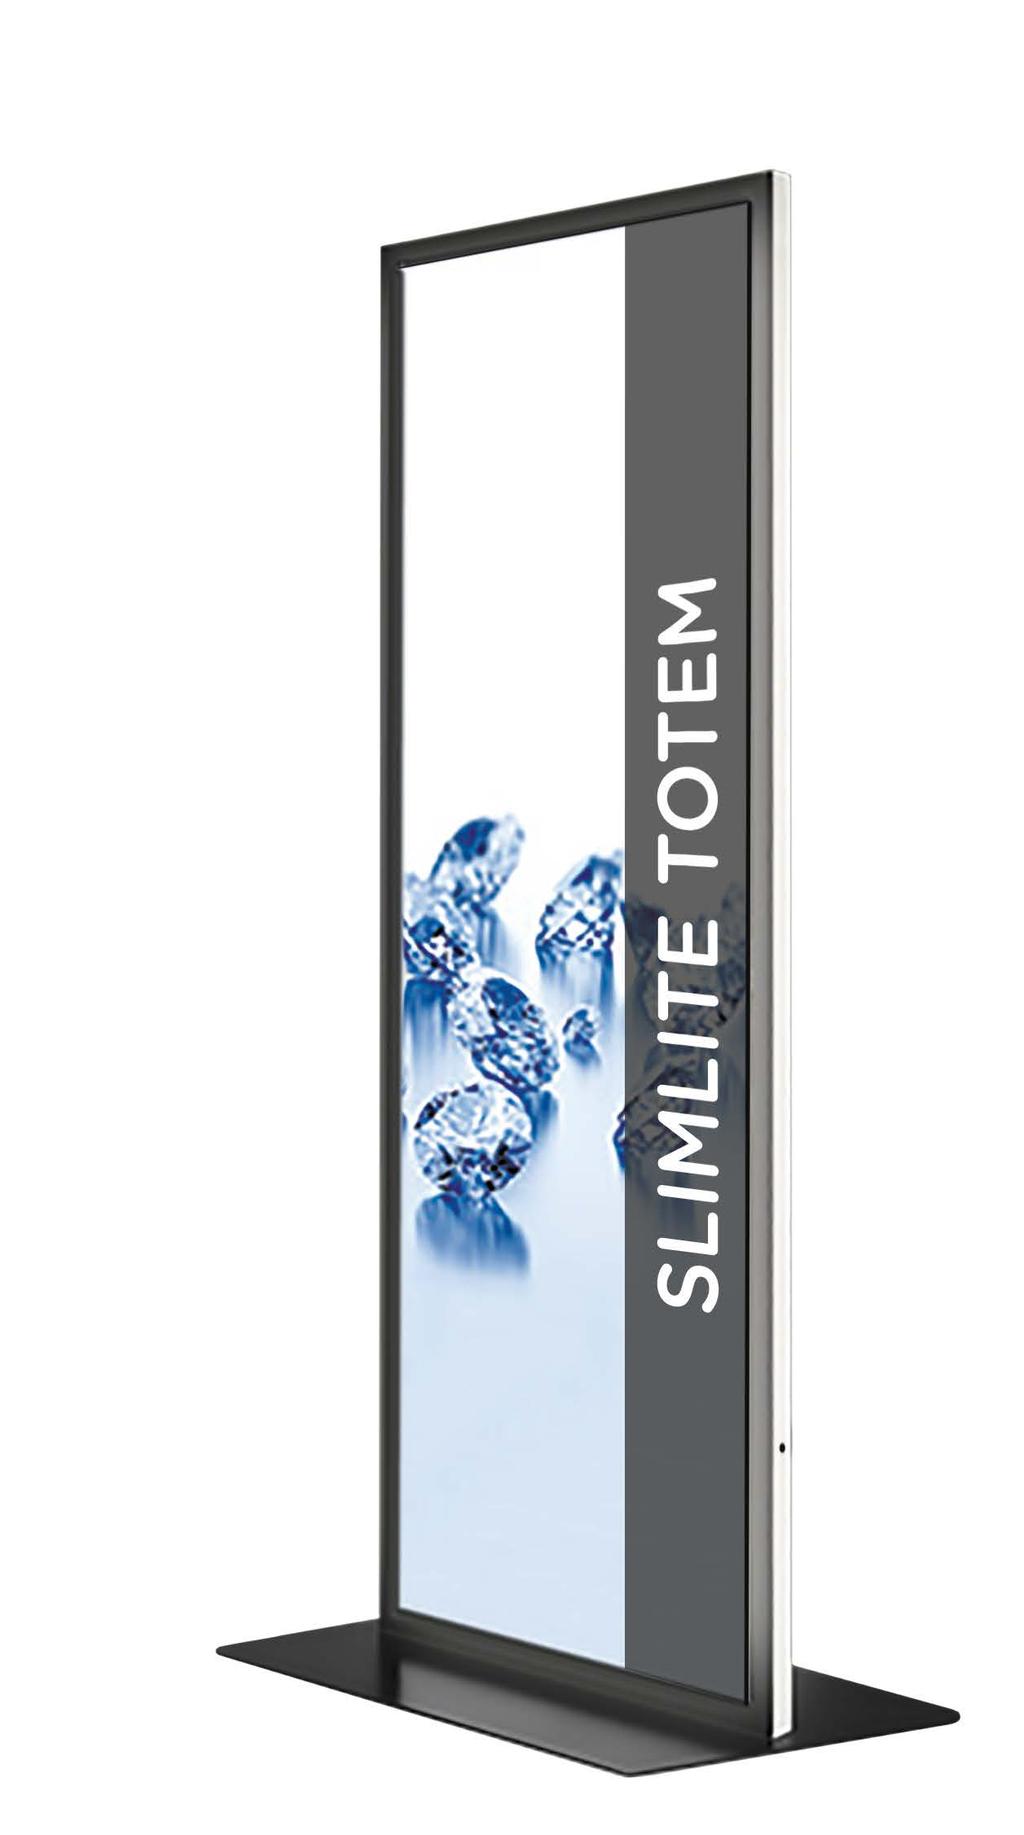 FREESTANDING TOTEMS Totem displays are great for retail environments used for wayfinding and promotions in shop entrances or near